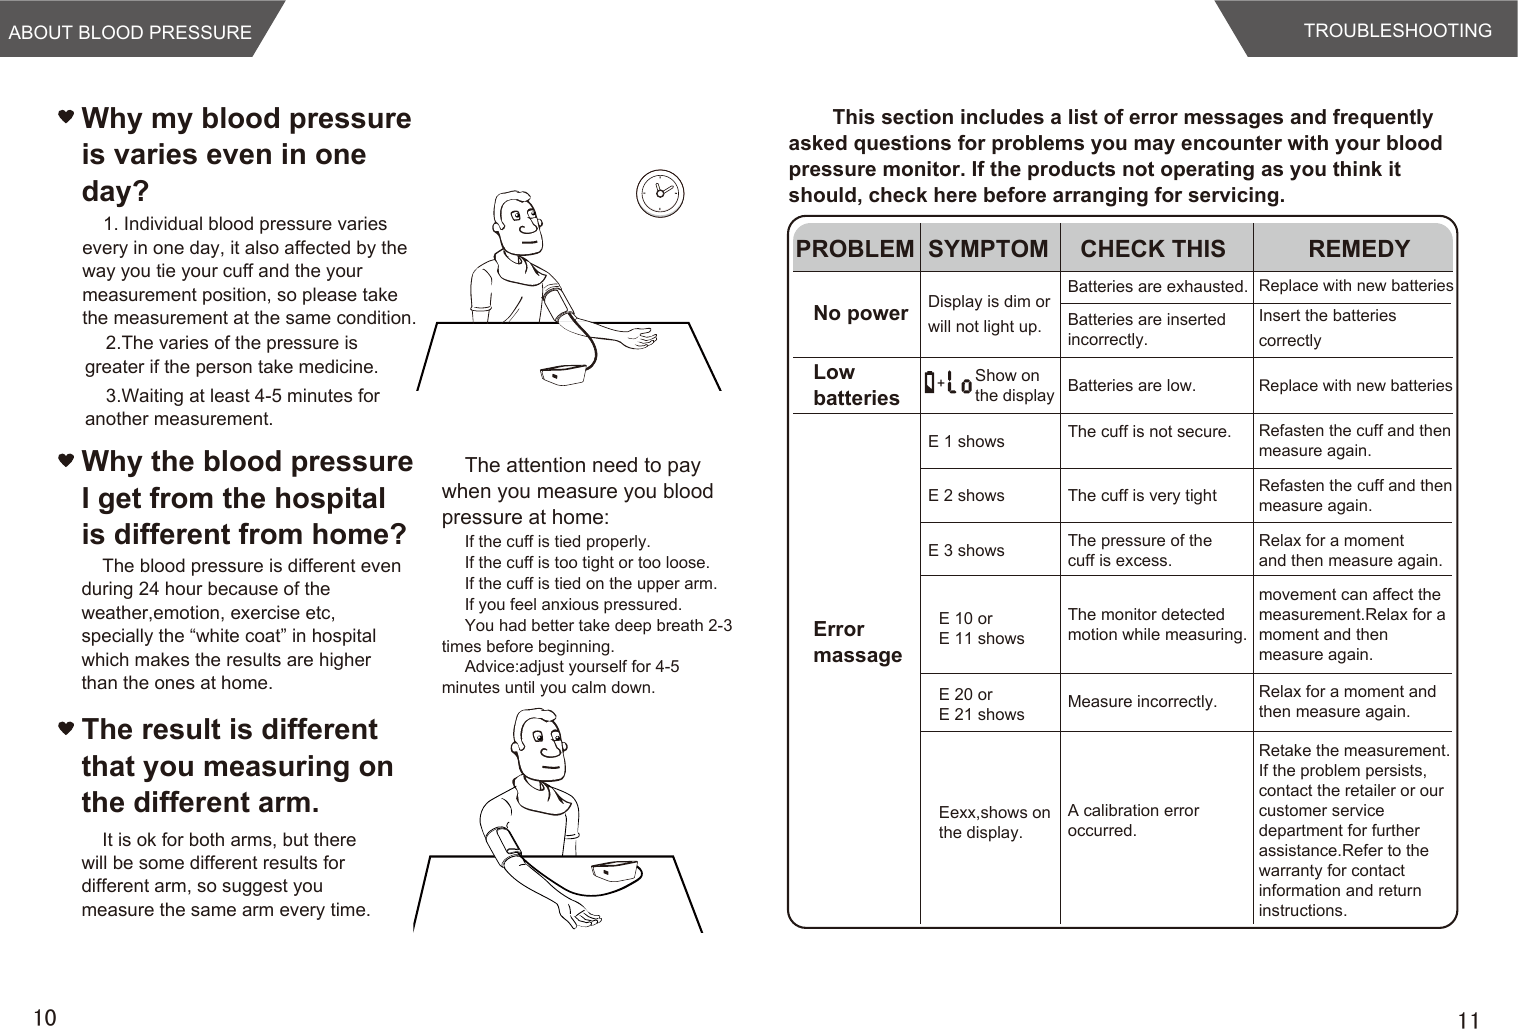 ABOUT BLOOD PRESSURE1. Individual blood pressure varies every in one day, it also affected by the way you tie your cuff and the your measurement position, so please take the measurement at the same condition.2.The varies of the pressure is greater if the person take medicine.3.Waiting at least 4-5 minutes for another measurement.TROUBLESHOOTING    This section includes a list of error messages and frequently asked questions for problems you may encounter with your blood pressure monitor. If the products not operating as you think it should, check here before arranging for servicing.Why my blood pressure is varies even in one day?1110The result is different that you measuring on the different arm.It is ok for both arms, but there will be some different results for different arm, so suggest you measure the same arm every time.Why the blood pressure I get from the hospital is different from home?The blood pressure is different even during 24 hour because of the weather,emotion, exercise etc, specially the “white coat” in hospital which makes the results are higher than the ones at home.PROBLEM SYMPTOM CHECK THIS REMEDYNo powerLowbatteriesErrormassageDisplay is dim orwill not light up.Batteries are exhausted. Replace with new batteriesInsert the batteries correctlyReplace with new batteriesBatteries are insertedincorrectly.Show onthe display Batteries are low.E 1 shows The cuff is not secure. Refasten the cuff and thenmeasure again.E 2 shows The cuff is very tight Refasten the cuff and thenmeasure again.E 3 shows The pressure of thecuff is excess.Relax for a momentand then measure again.The monitor detectedmotion while measuring.movement can affect themeasurement.Relax for a moment and then measure again.Measure incorrectly. Relax for a moment andthen measure again.A calibration erroroccurred.Retake the measurement.If the problem persists,contact the retailer or ourcustomer service department for further assistance.Refer to the warranty for contact information and return instructions.E 10 or E 11 showsE 20 or E 21 showsEexx,shows on the display.The attention need to pay when you measure you blood pressure at home:If the cuff is tied properly.If the cuff is too tight or too loose.If the cuff is tied on the upper arm.If you feel anxious pressured.You had better take deep breath 2-3 times before beginning.Advice:adjust yourself for 4-5 minutes until you calm down. 